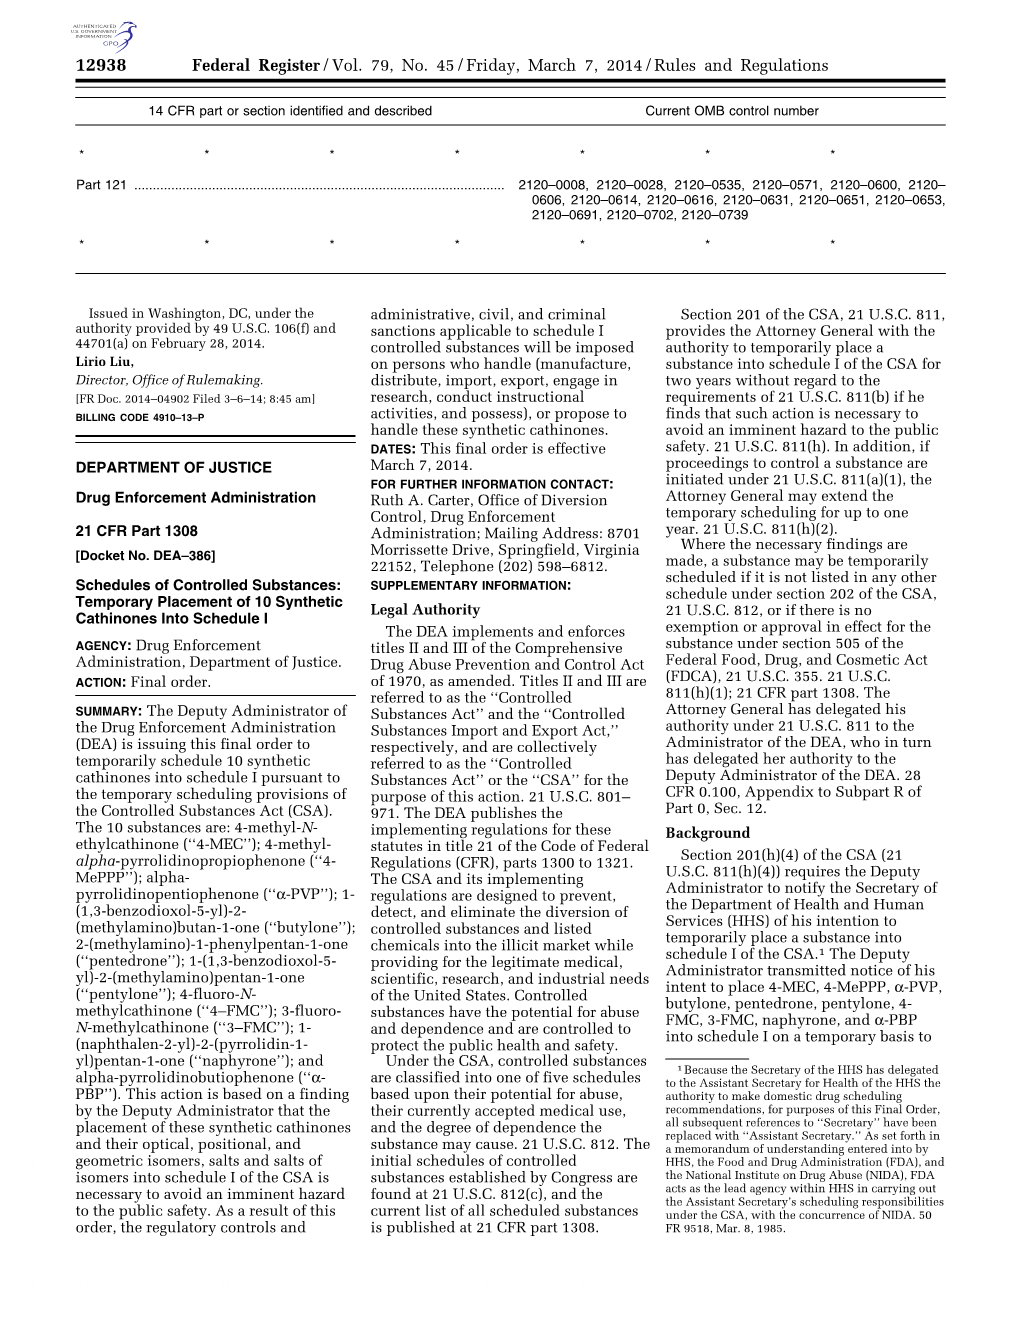 Federal Register/Vol. 79, No. 45/Friday, March 7, 2014/Rules and Regulations